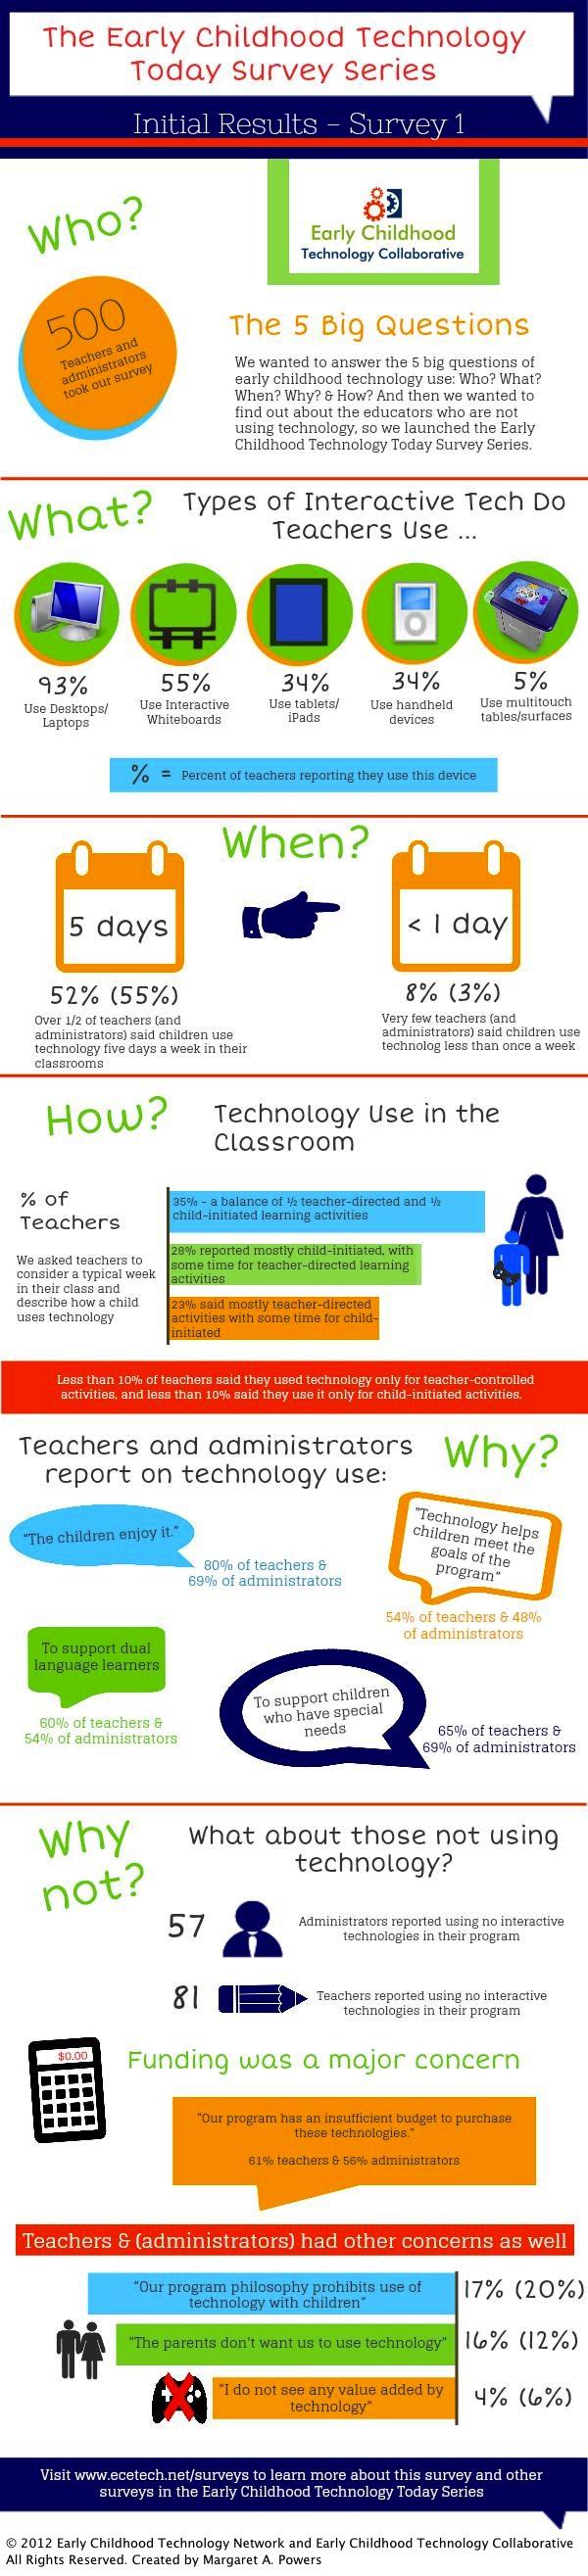 the Early Childhood Technology Today Survey Series